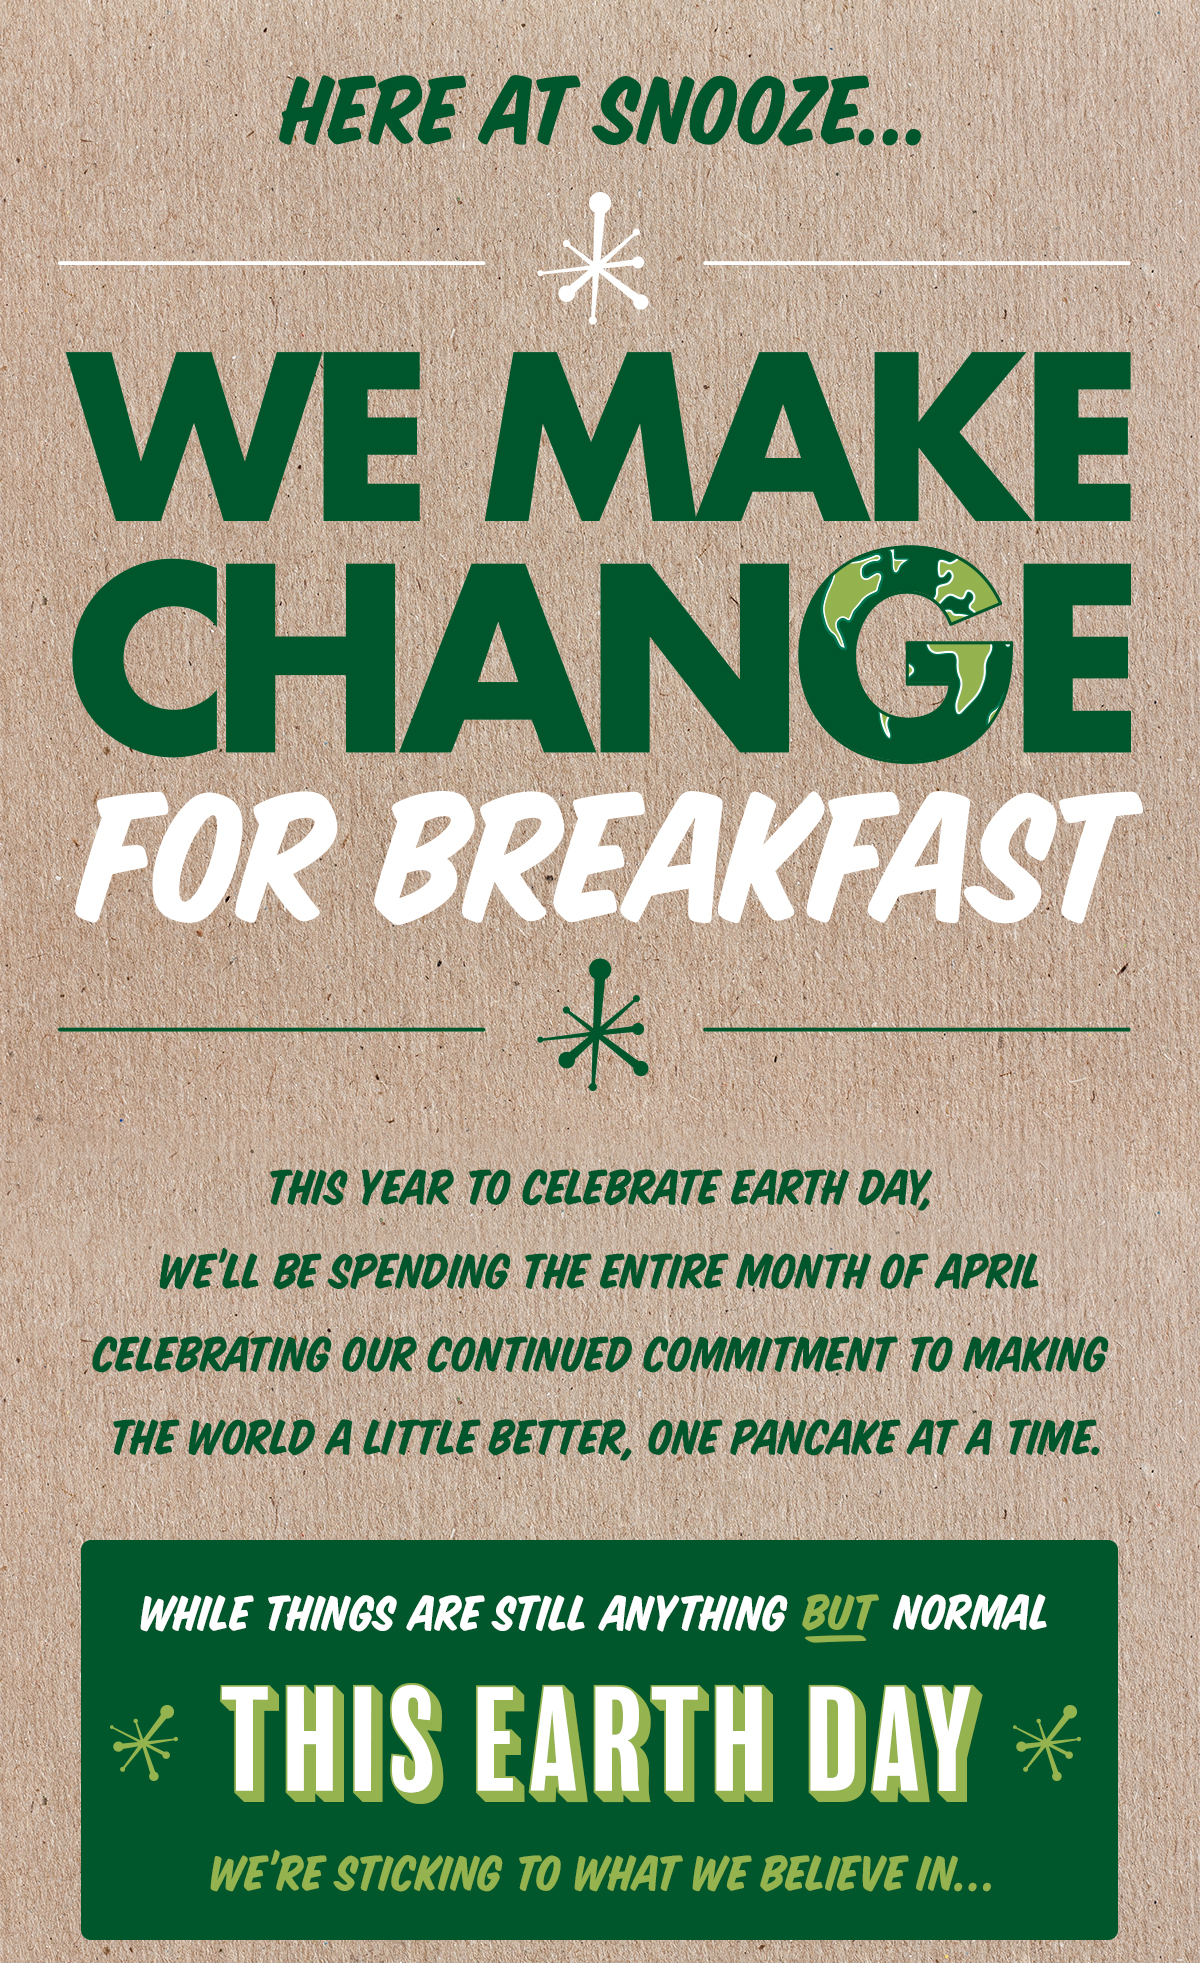 Here at Snooze we make change for breakfast! This year we're spending the whole month of April celebrating our continued comitment to making the world a little better one pancake at a time. While things are still anything but normal, this Earth Day, we're sticking to what we believe in...